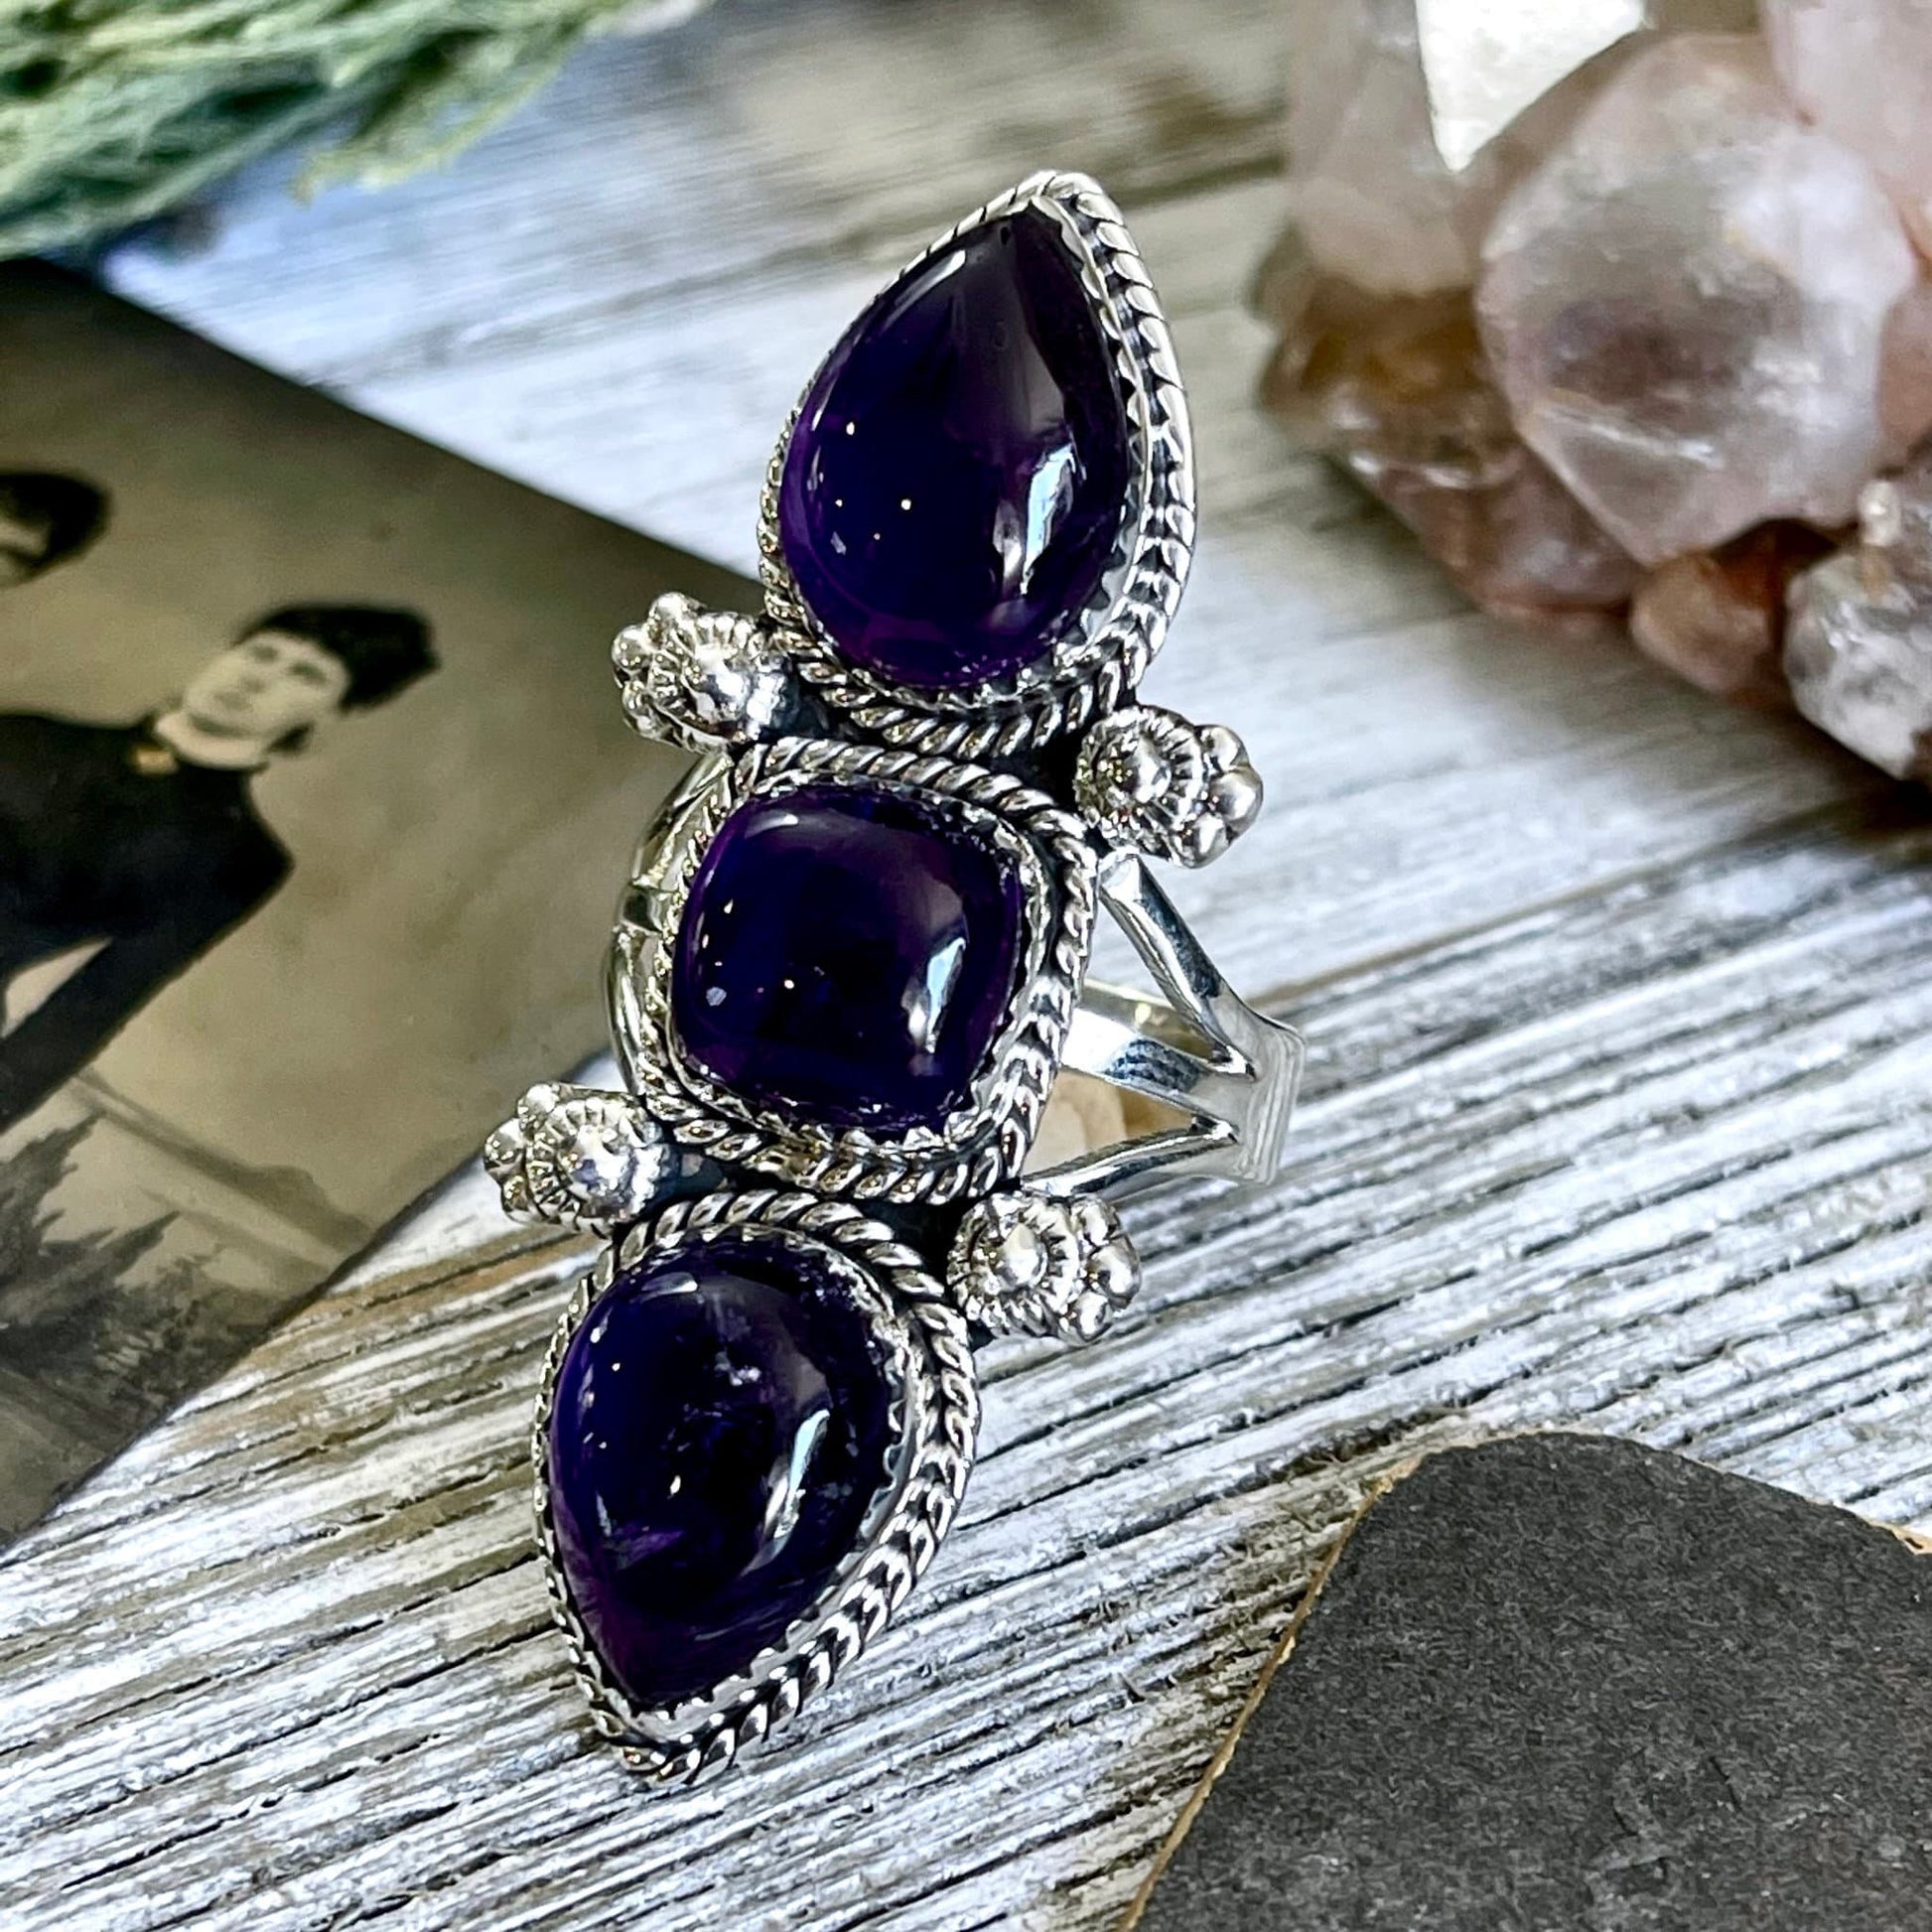 Amethyst Jewelry, Amethyst Ring, Big Crystal Jewelry, Big Crystal Ring, Big Stone Ring, Bohemian Ring, Boho Jewelry, Boho Ring, Etsy Id 1185689756, Foxlark Alchemy, Foxlark- Rings, Gift For Woman, Gypsy Ring, Jewelry, Rings, Statement Rings